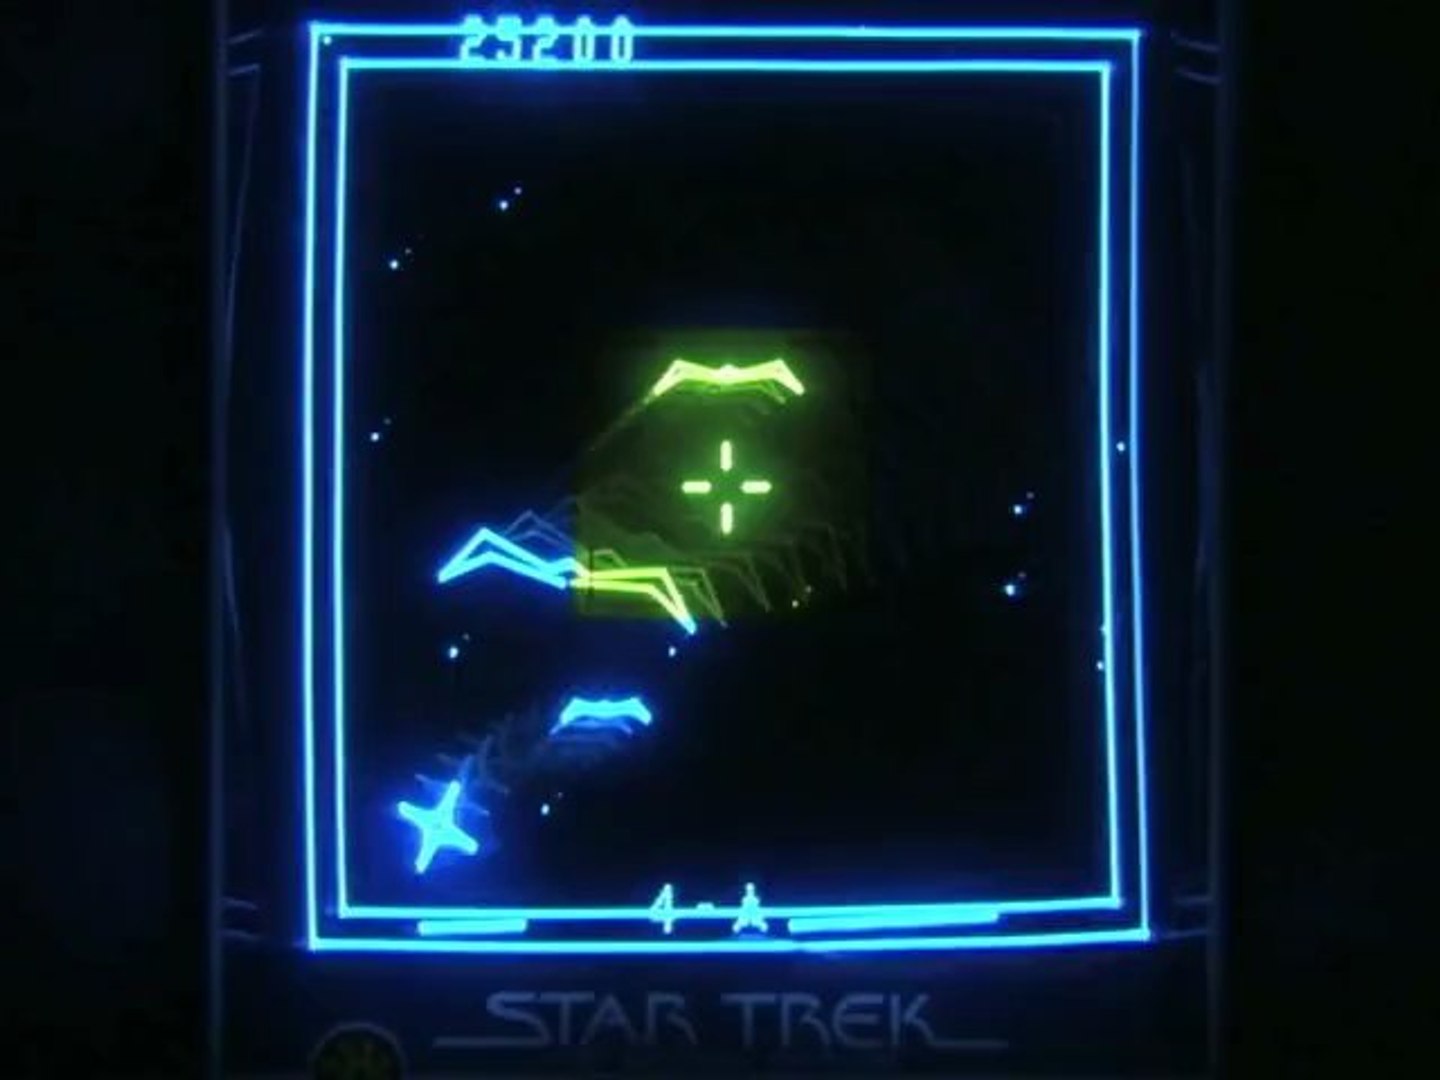 Retro Game Reviews: Space Wars (Vectrex review)